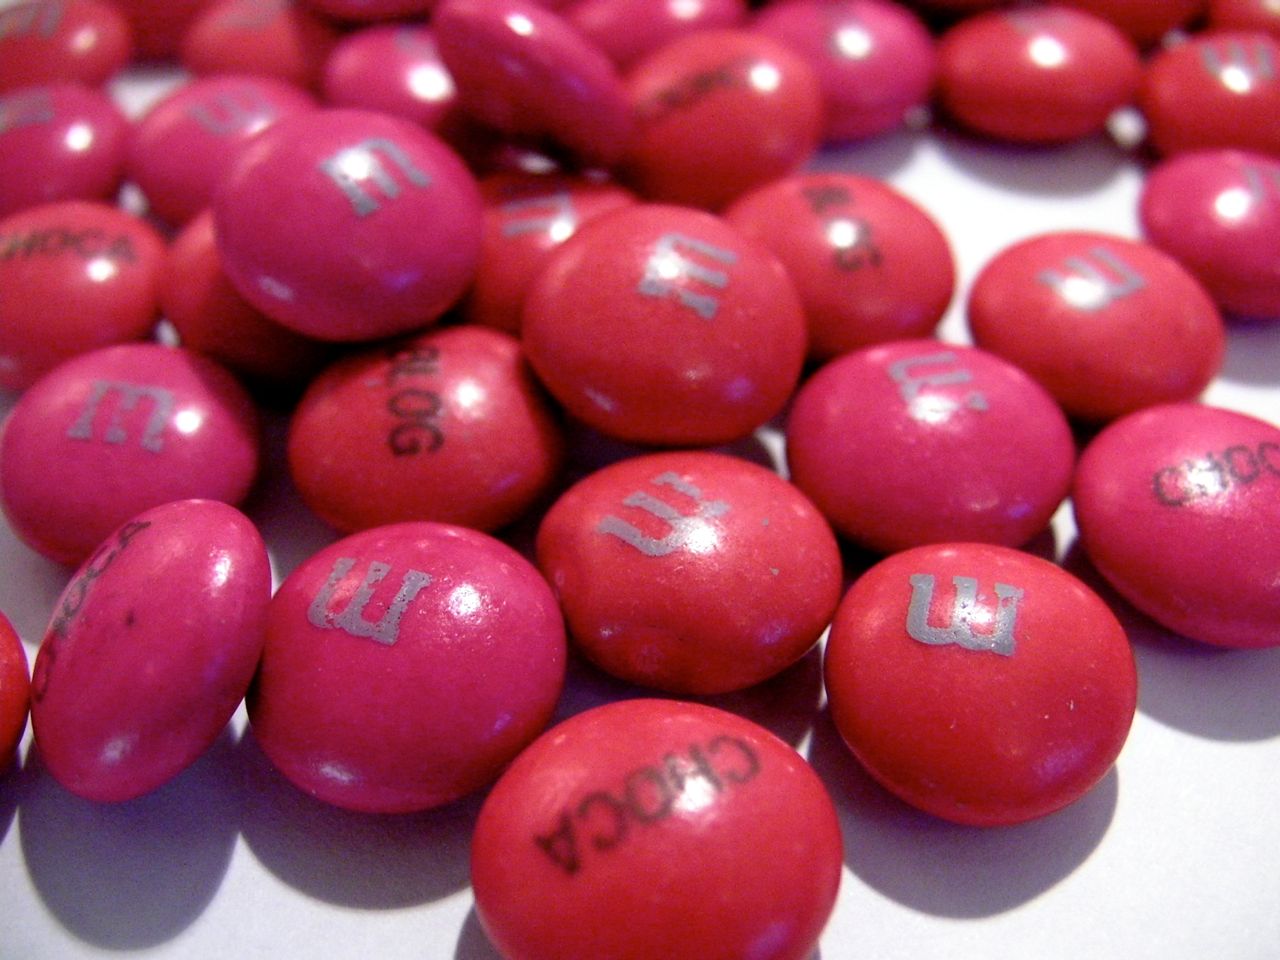 Personalized M&M's